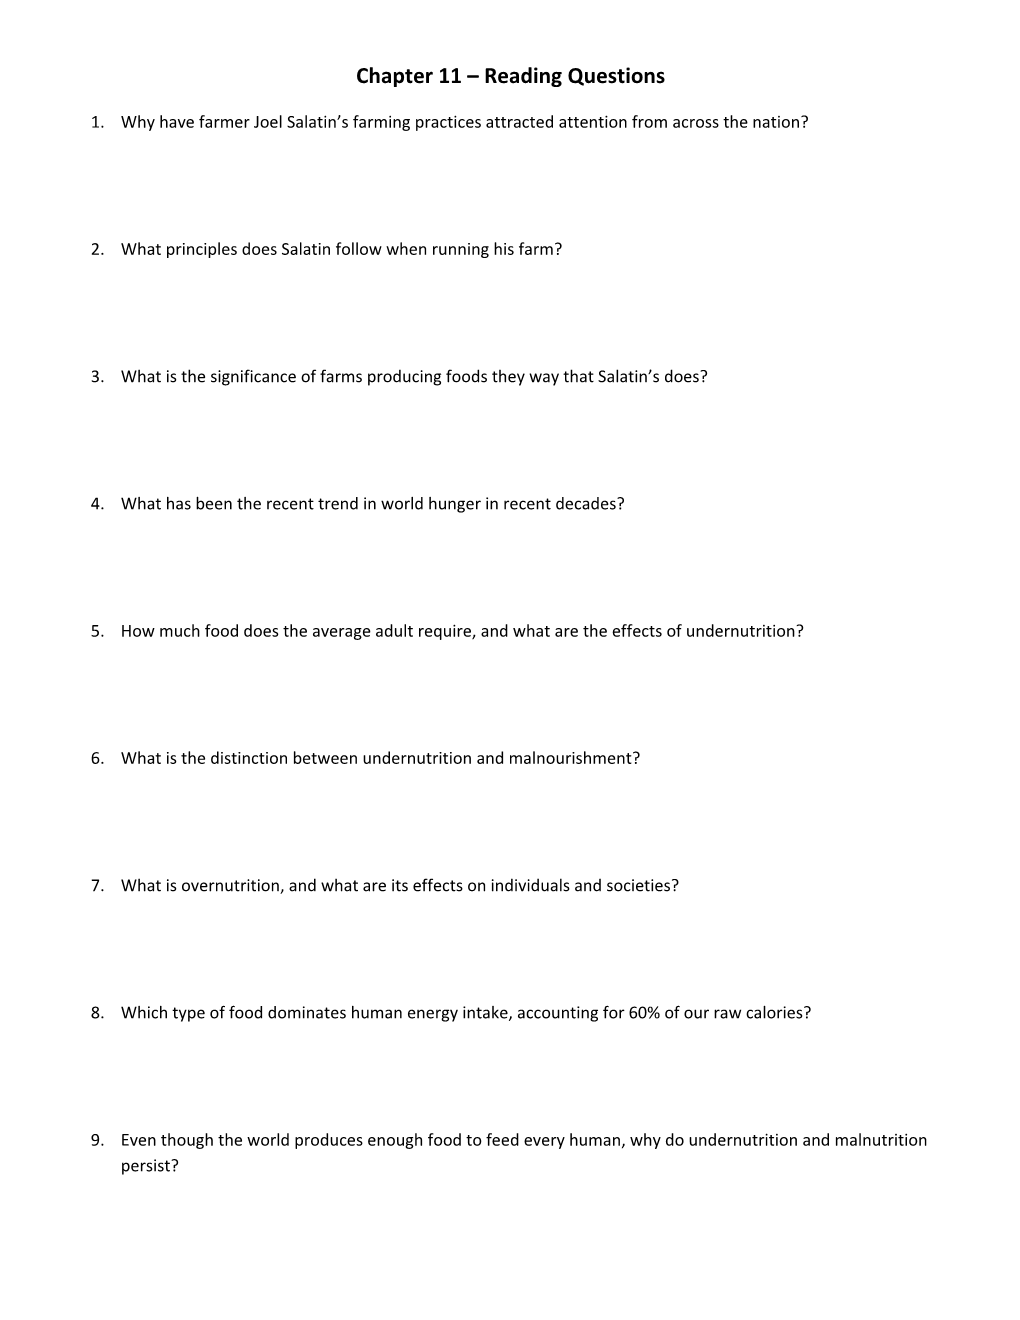 Chapter 11 Reading Questions